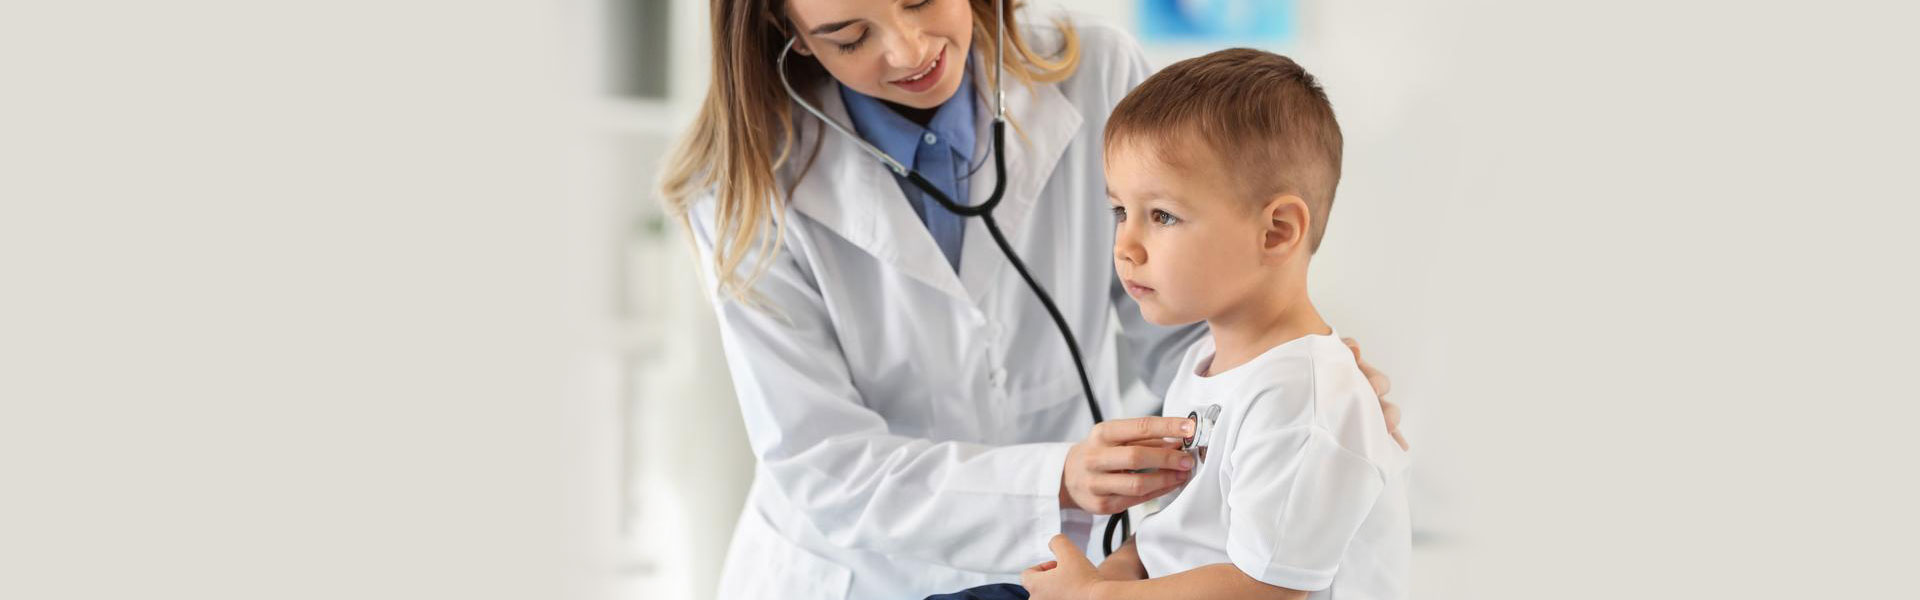 What Is Pediatric Cardiology and Why Is It Essential?